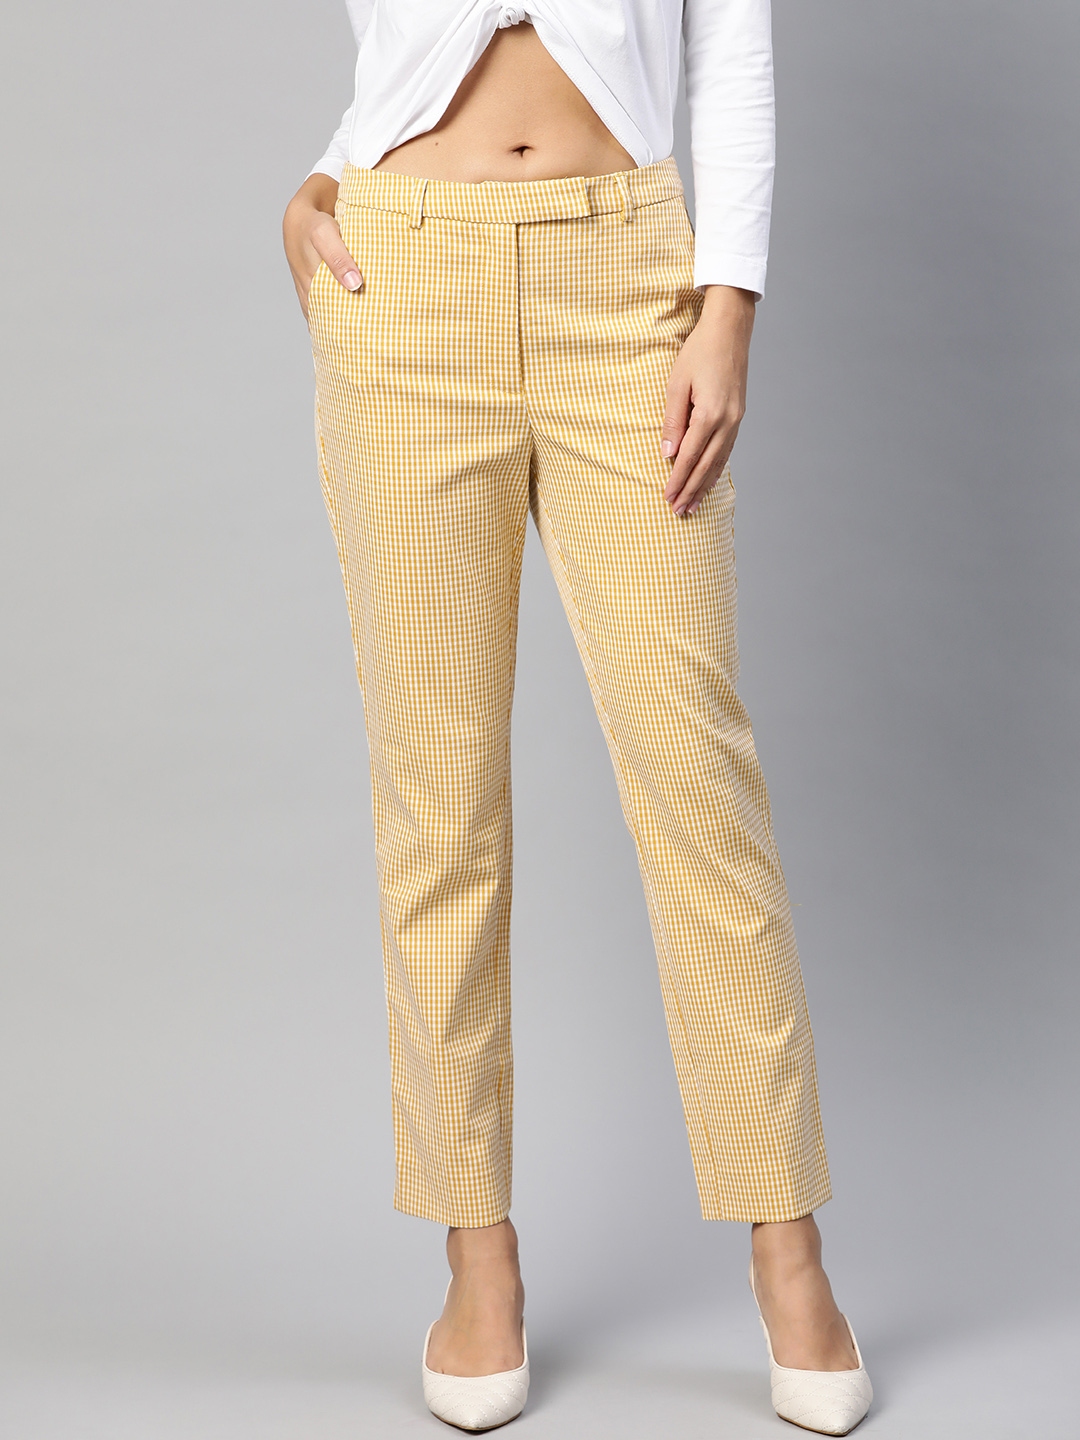 Buy Marks & Spencer Women Yellow & White Checked Slim Fit Cropped ...